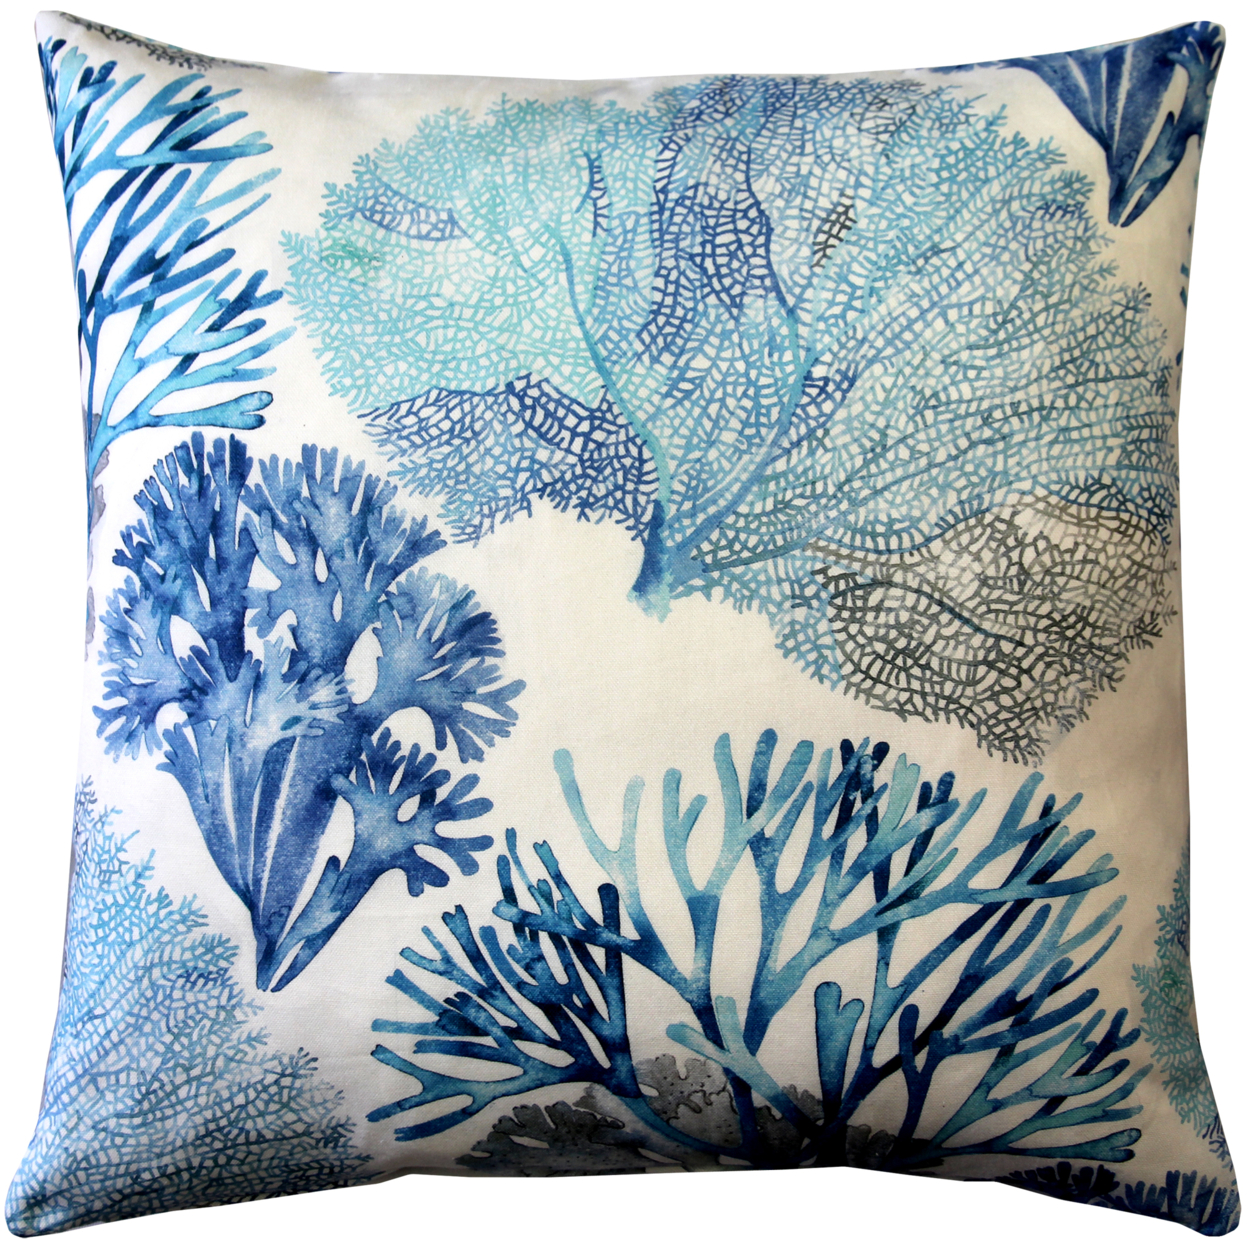 Tiger Beach Blue Coral Throw Pillow 21x21 Inches Square, Complete Pillow With Polyfill Pillow Insert